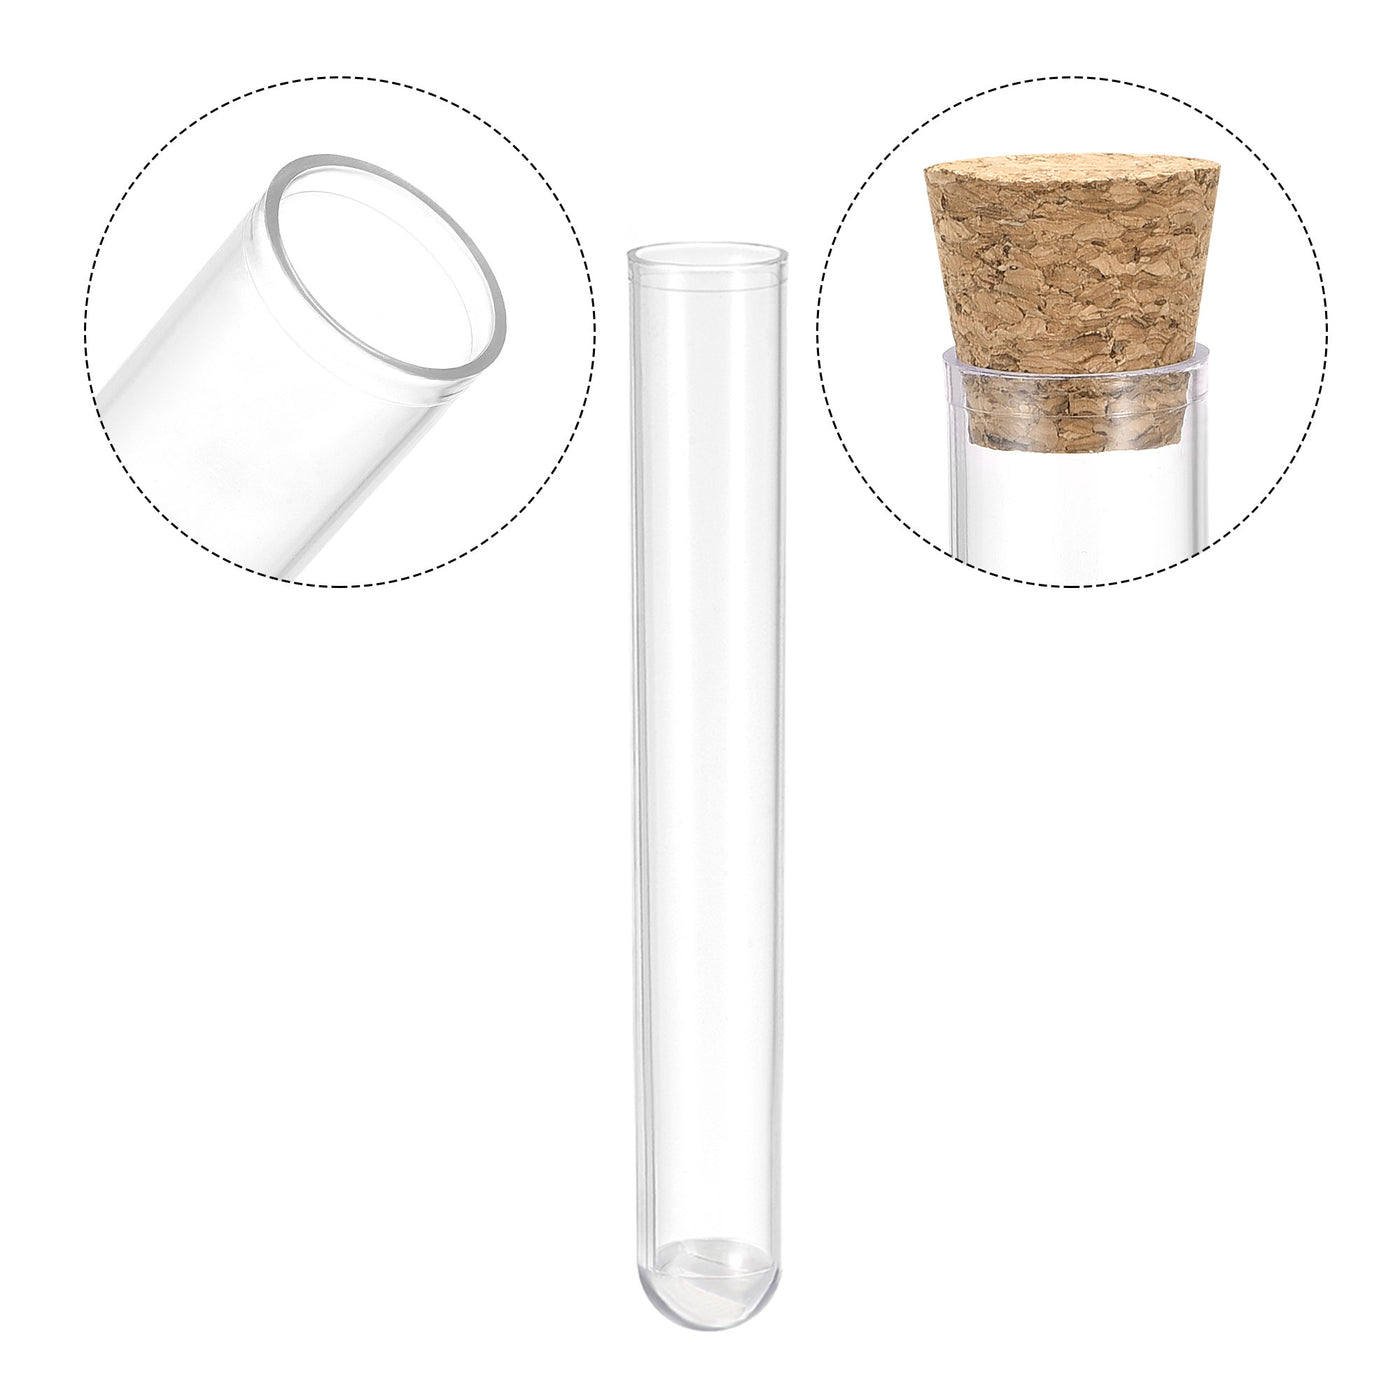 Uxcell Uxcell 20Pcs PS Plastic Test Tubes with Cork Stoppers, Round Base, 16x125mm